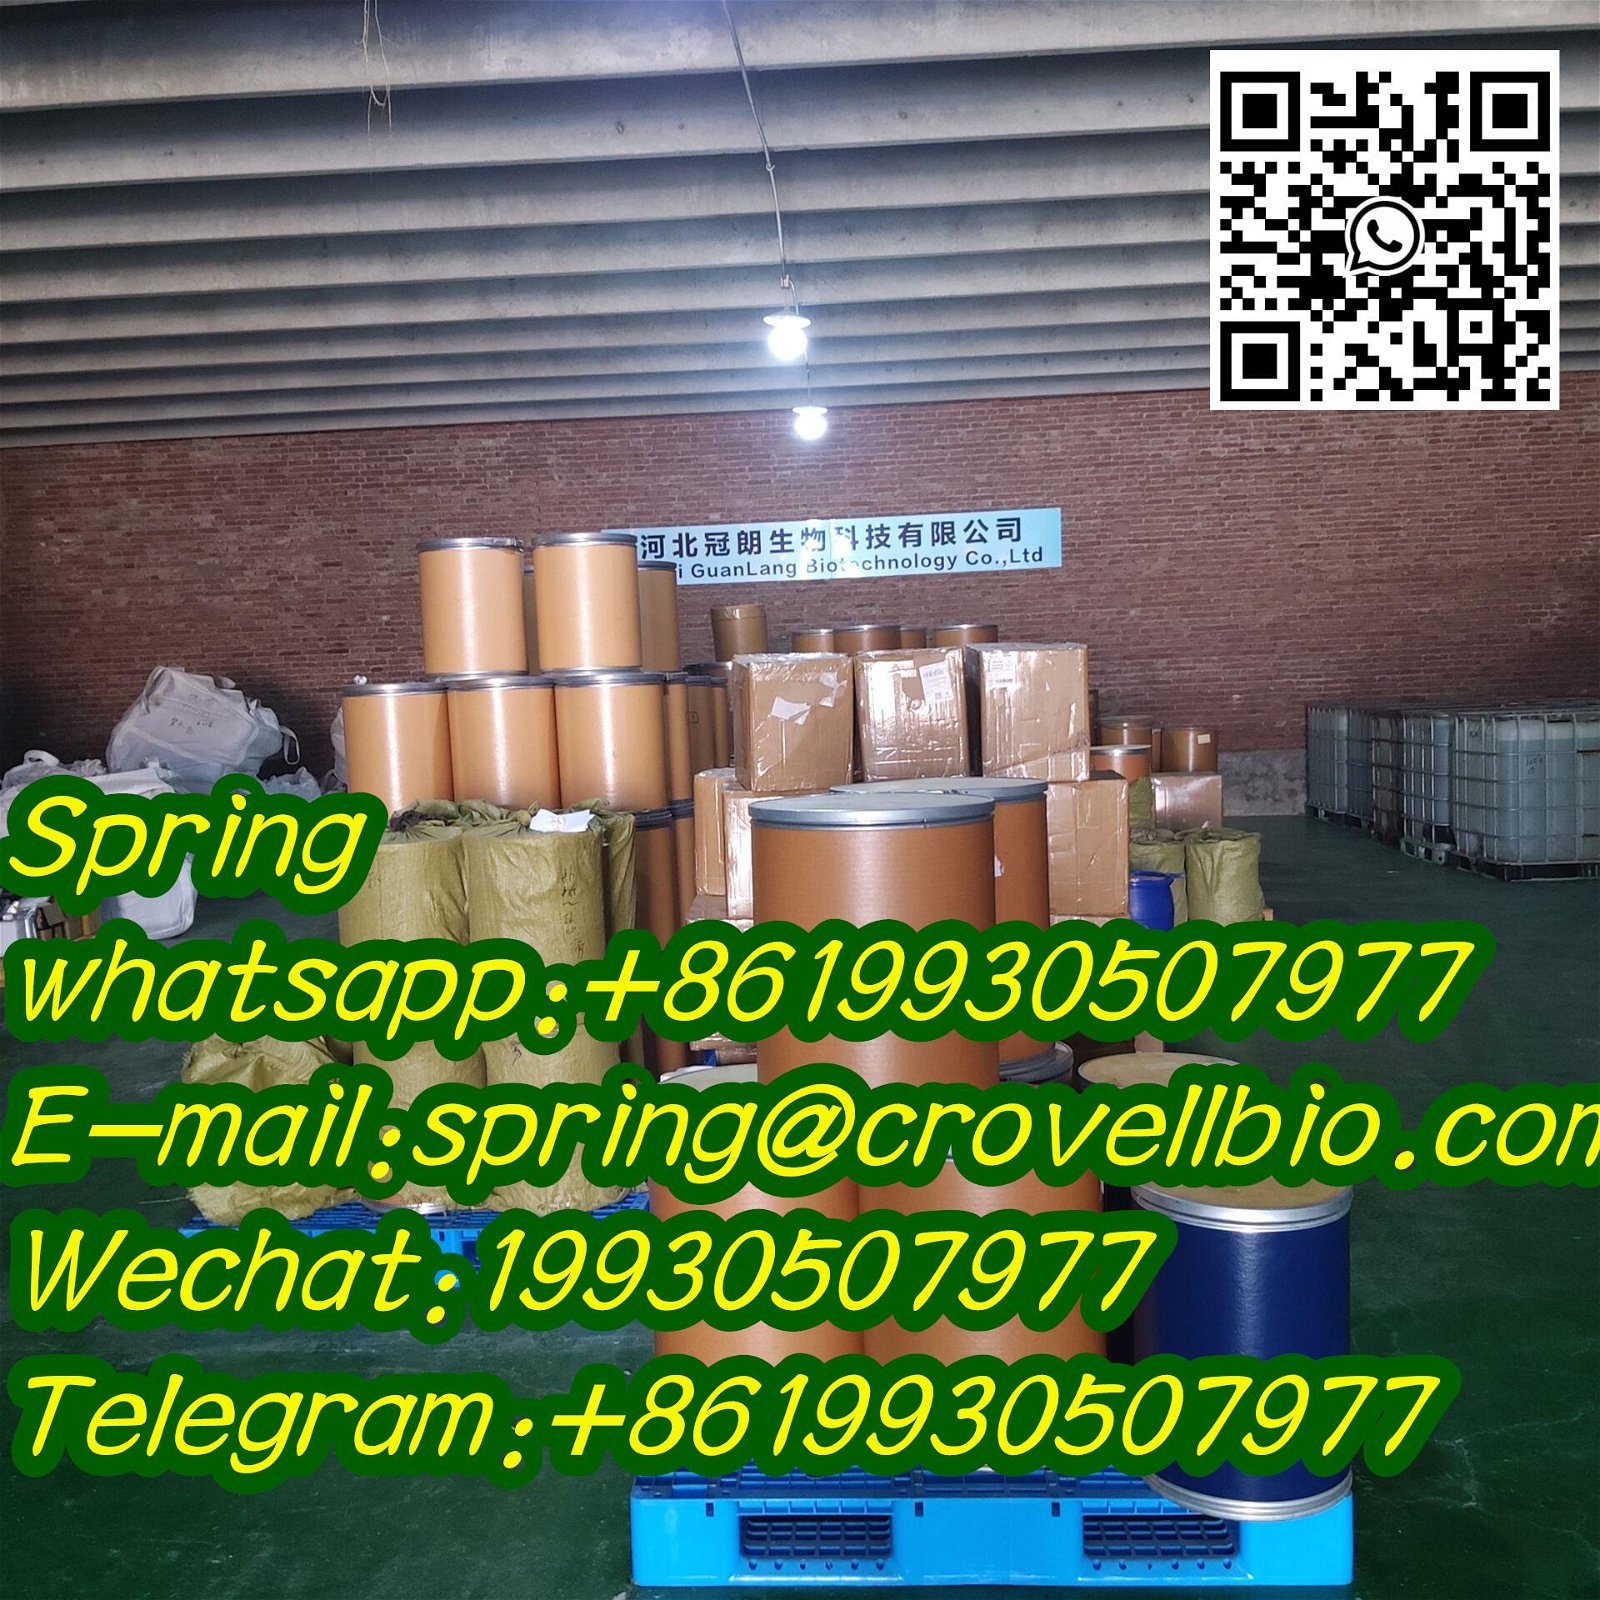 N-METHYLBENZAMIDE CAS 613-93-4 factory offer high quality +8619930507977 4